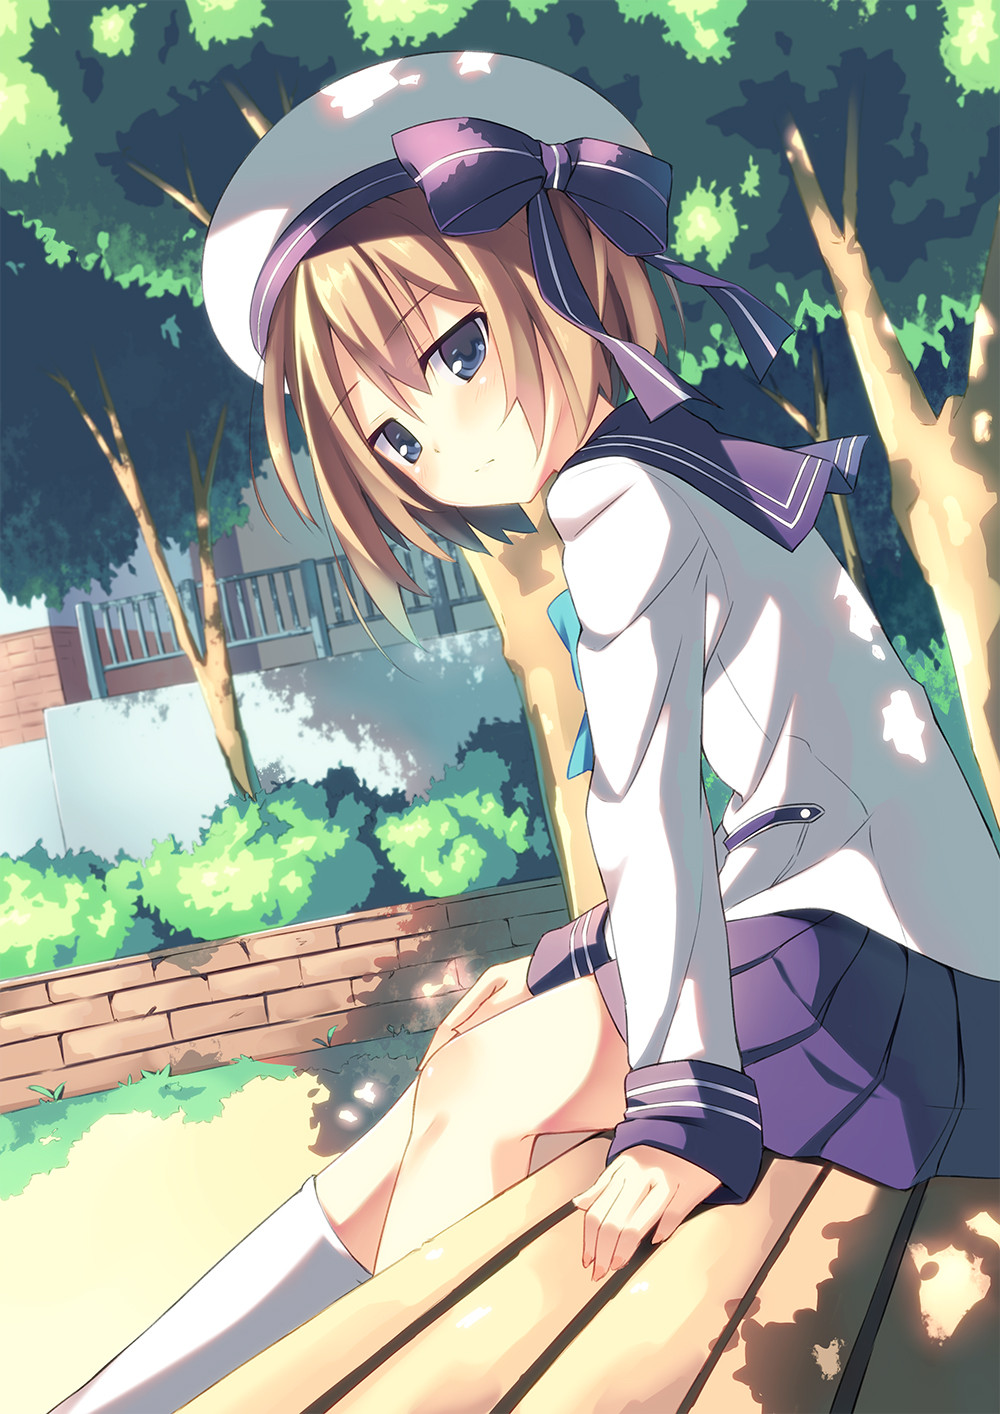 ch-jigen-game-neptune-the-animation-ot-this-is-gamindustri